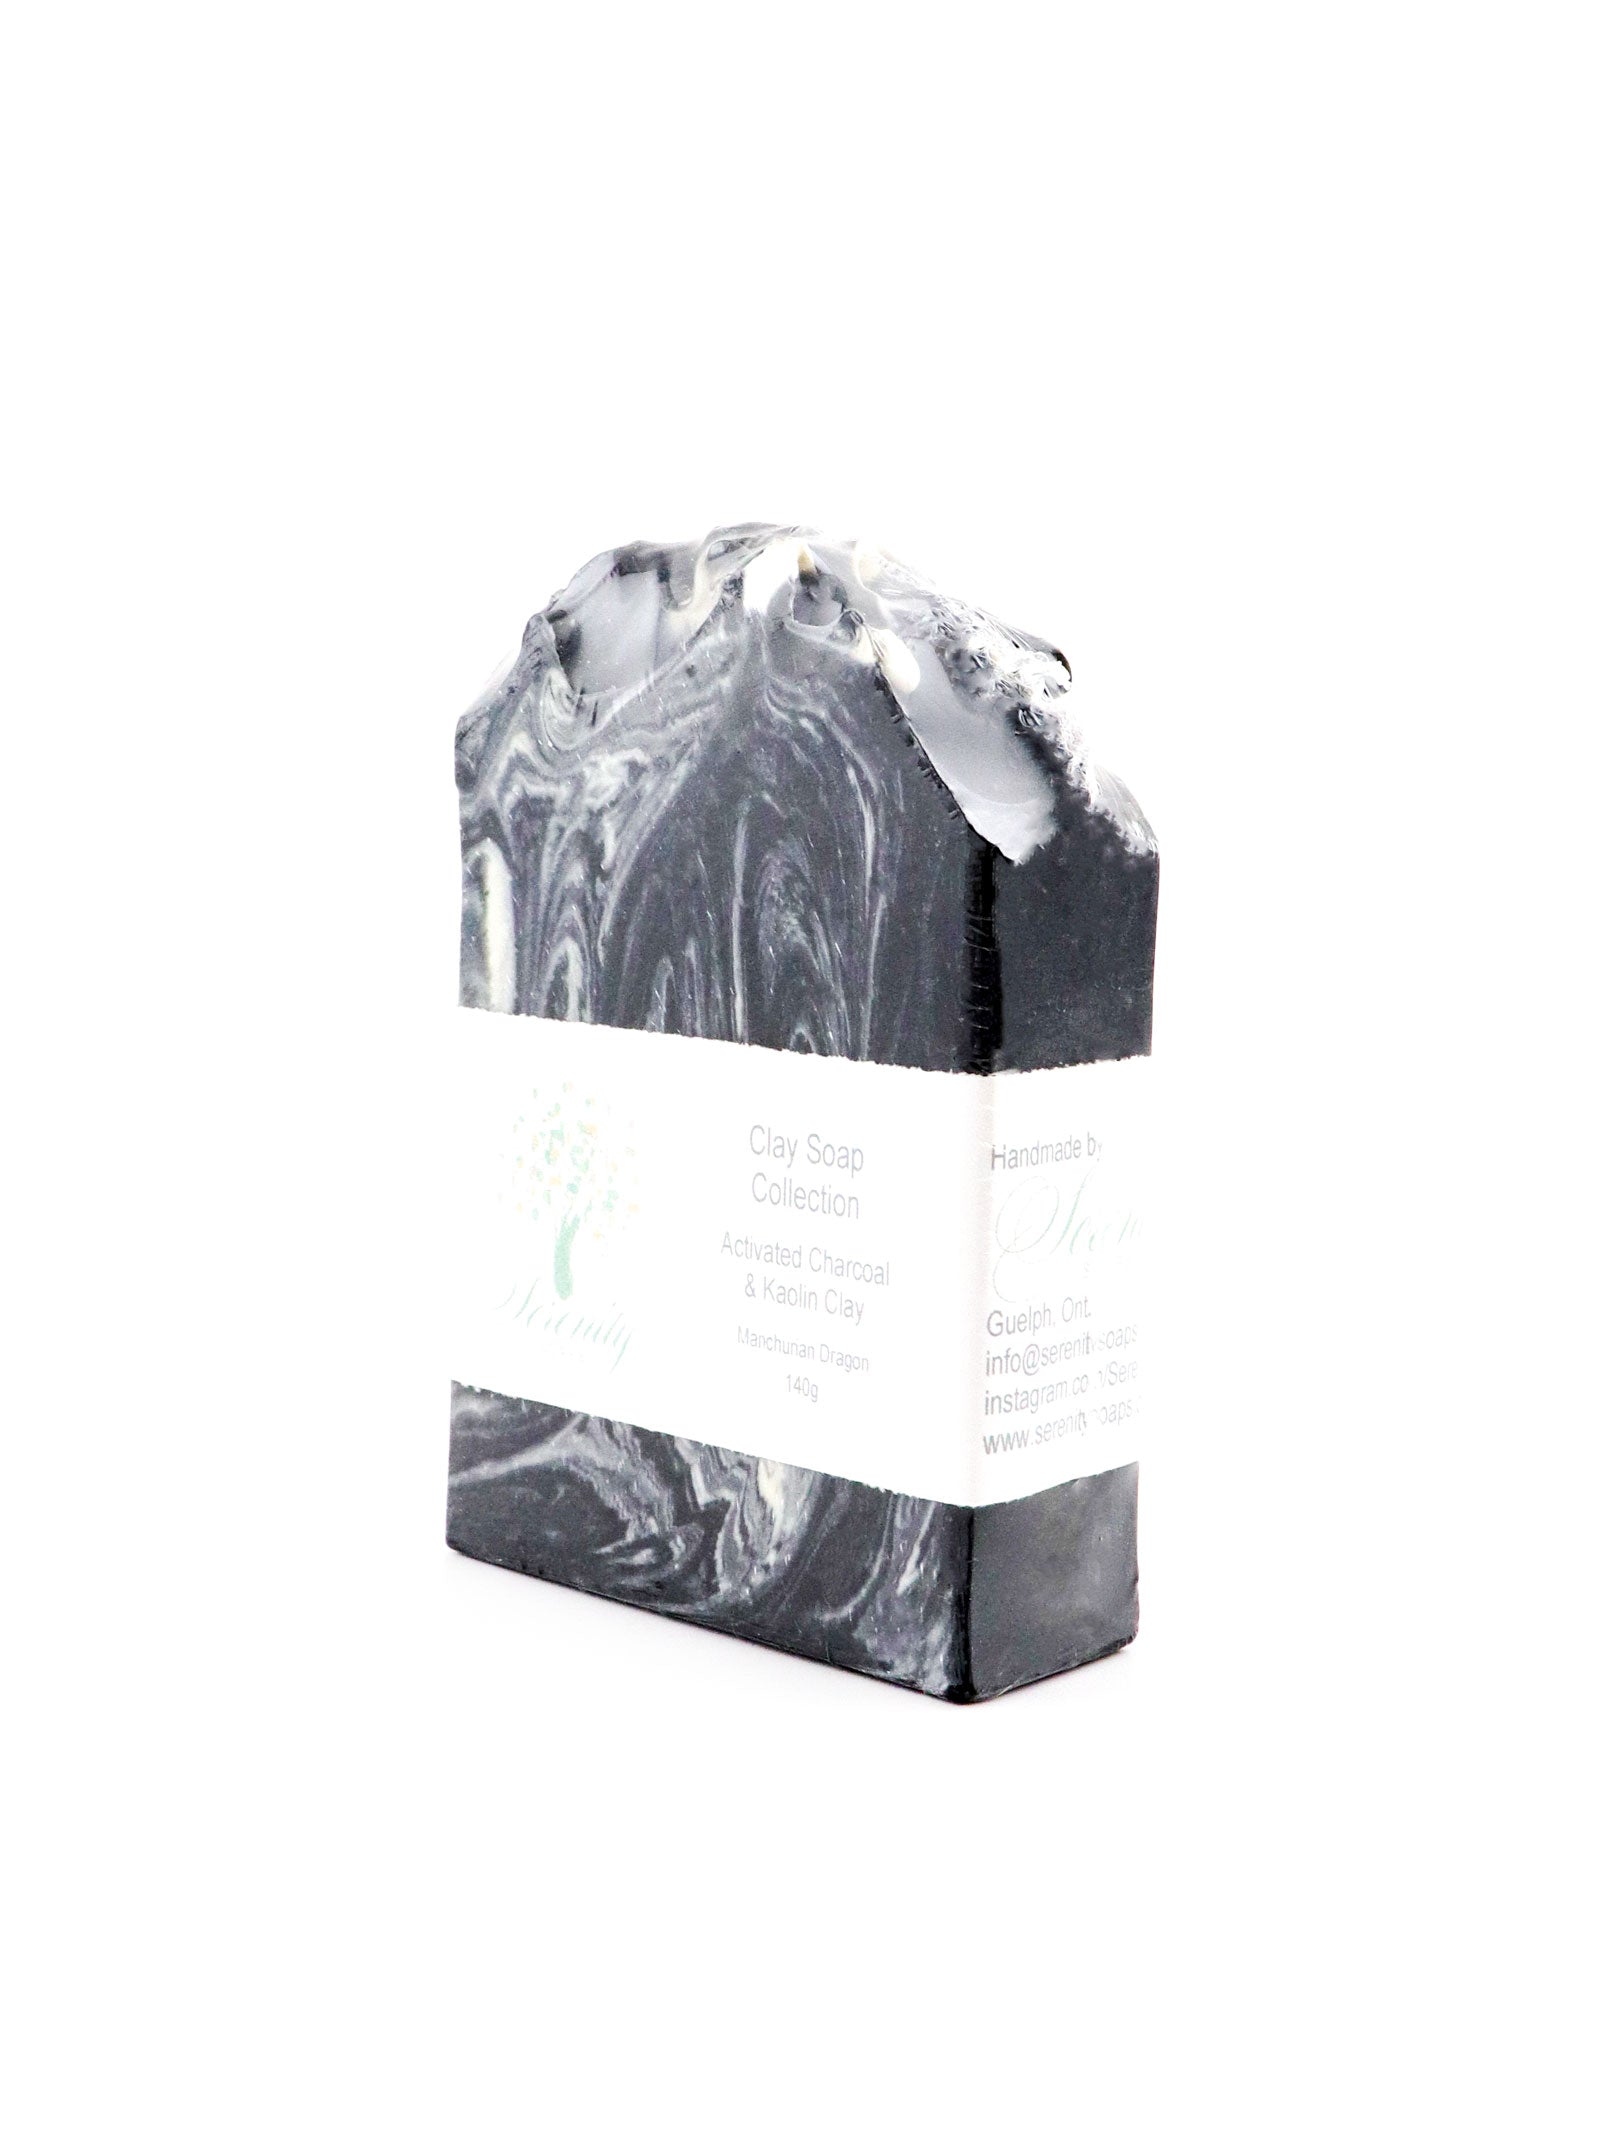 HANDMADE ACTIVATED CHARCOAL WITH KAOLIN CLAY ARTISAN SOAP